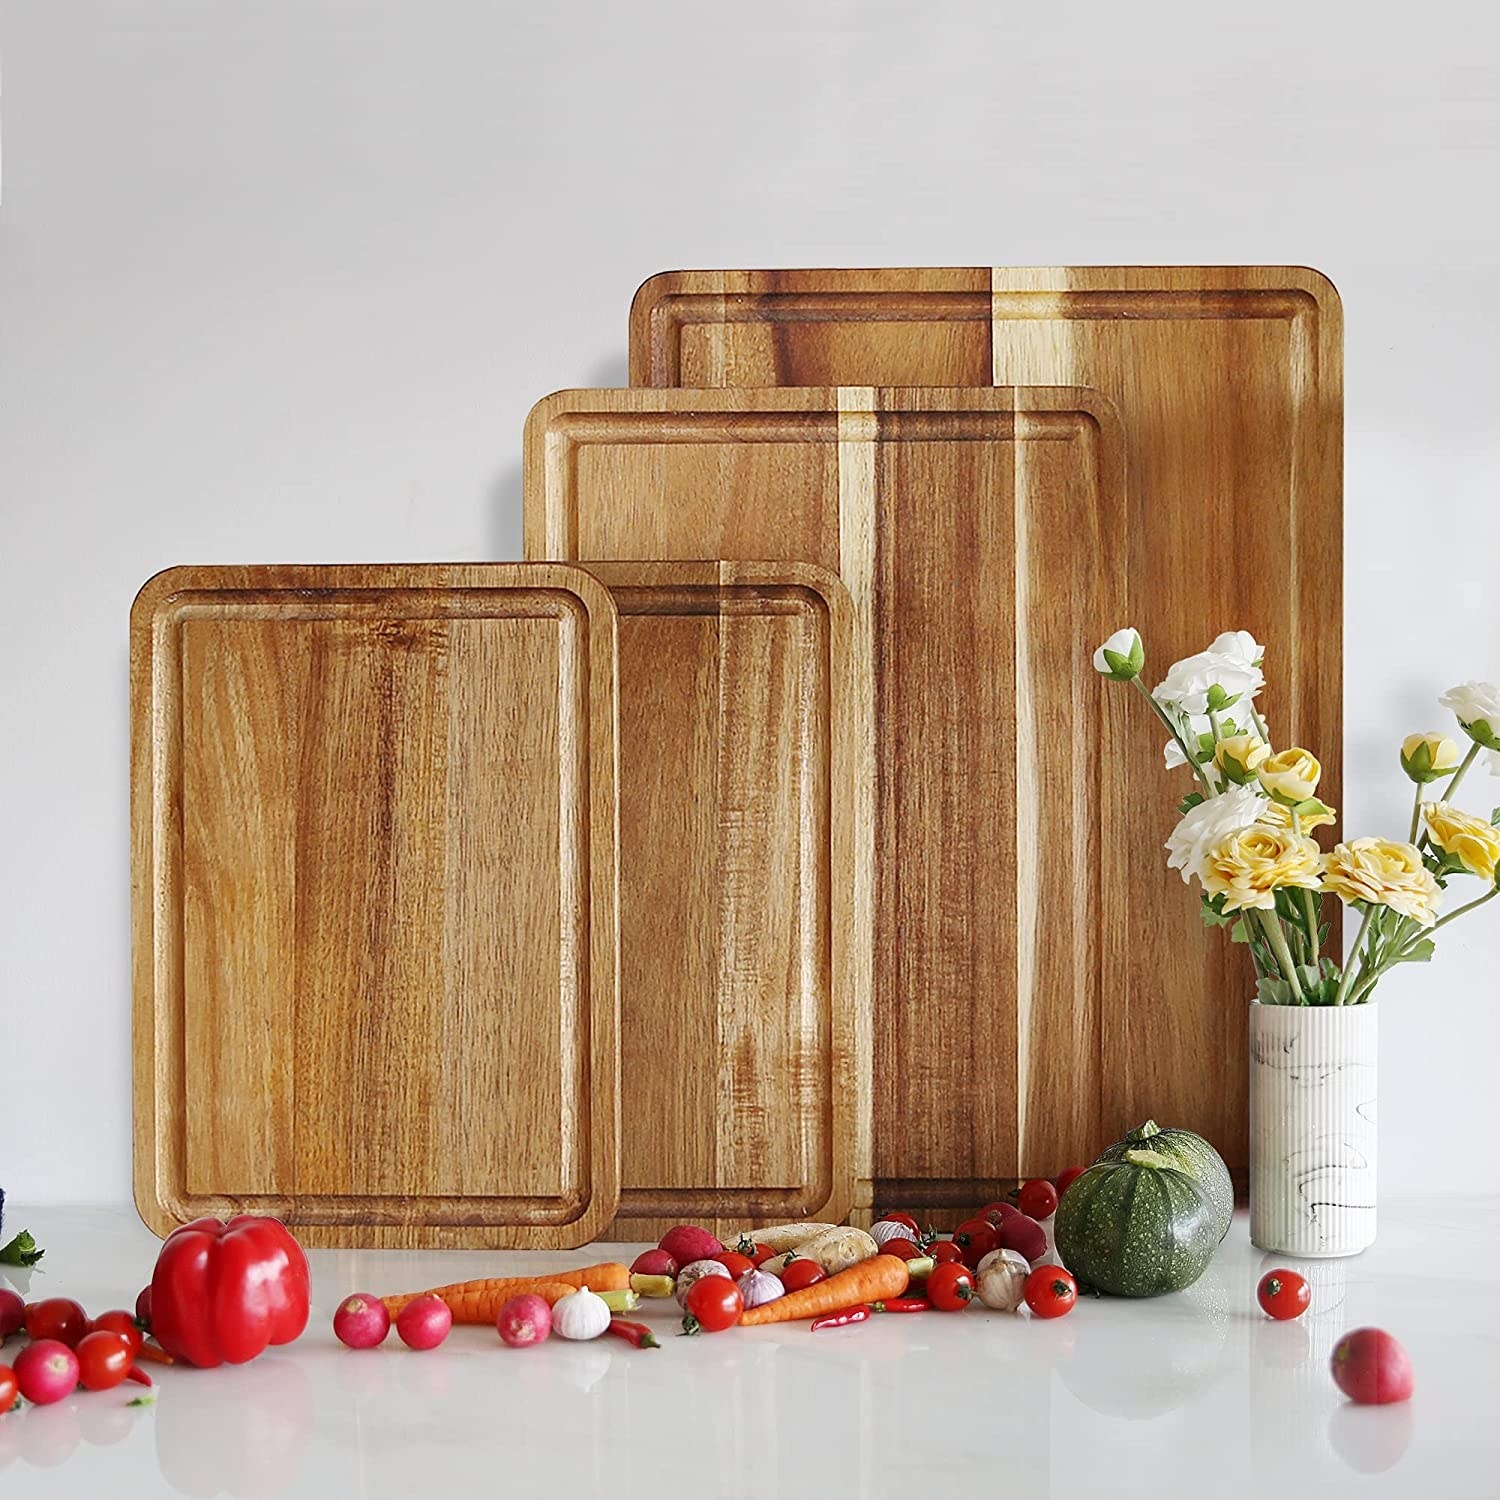 The four cutting boards displayed